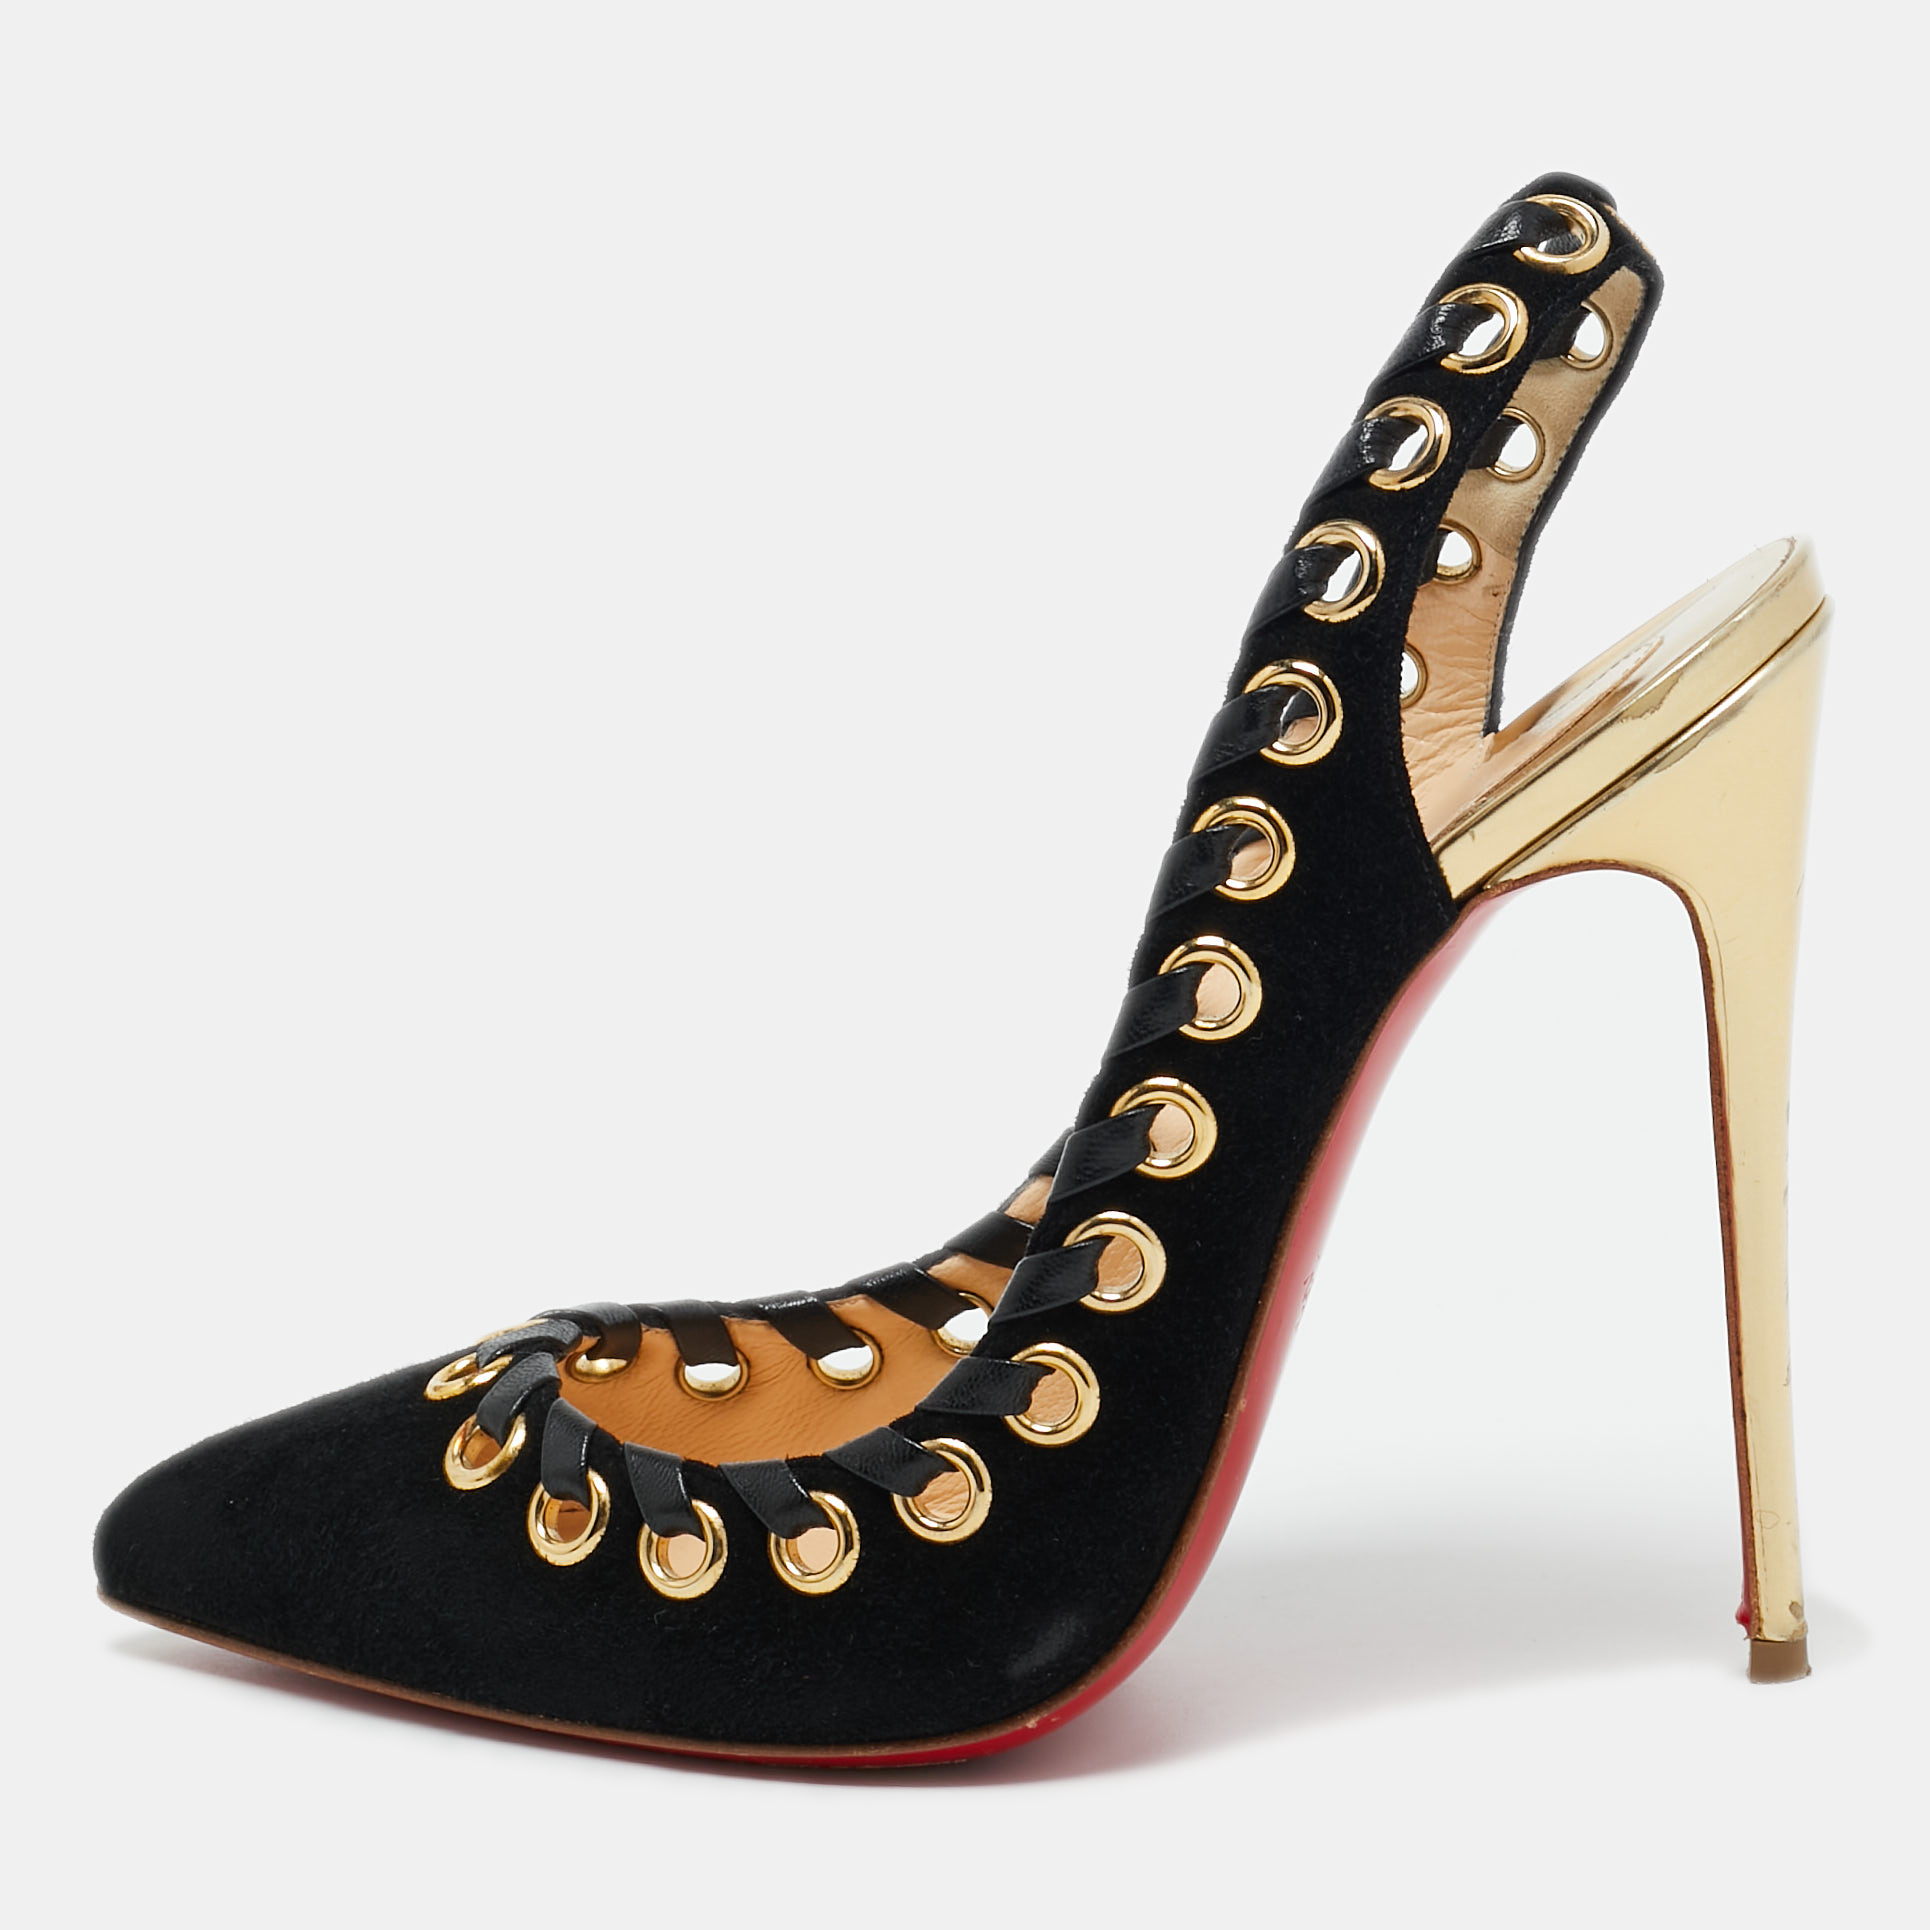 Christian Louboutin brings you this stunning pair of Whipstitch Ostri pumps that will elevate your outfit and give you confidence in every step. The chic suede sandals come with pointed toes and flaunt leather trims looped through gold tone eyelets. They are lined with leather and are finished with 12cm heels and signature red soles.